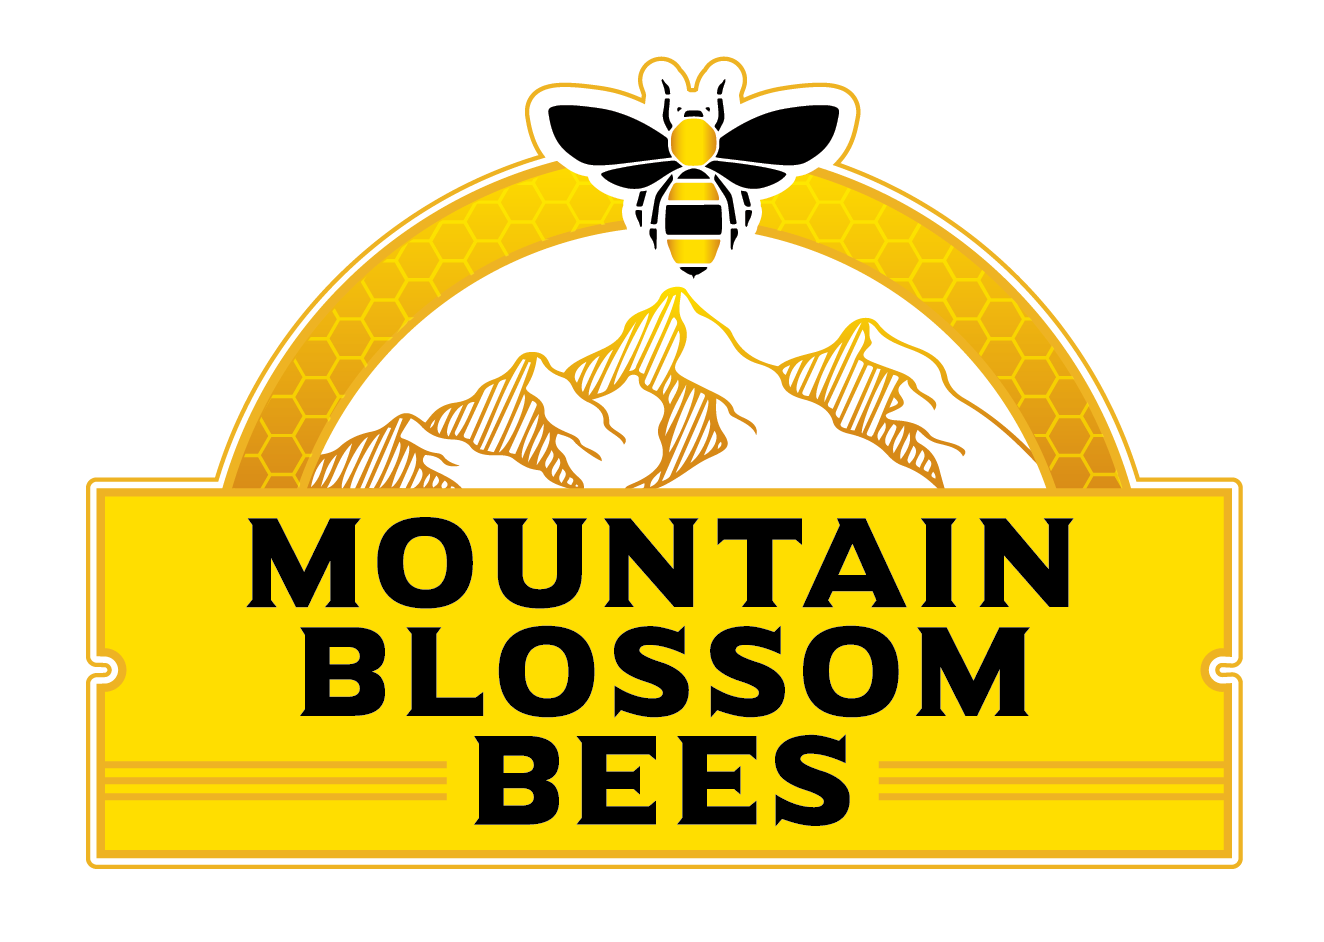 Mountain Blossom Bees - site under construction